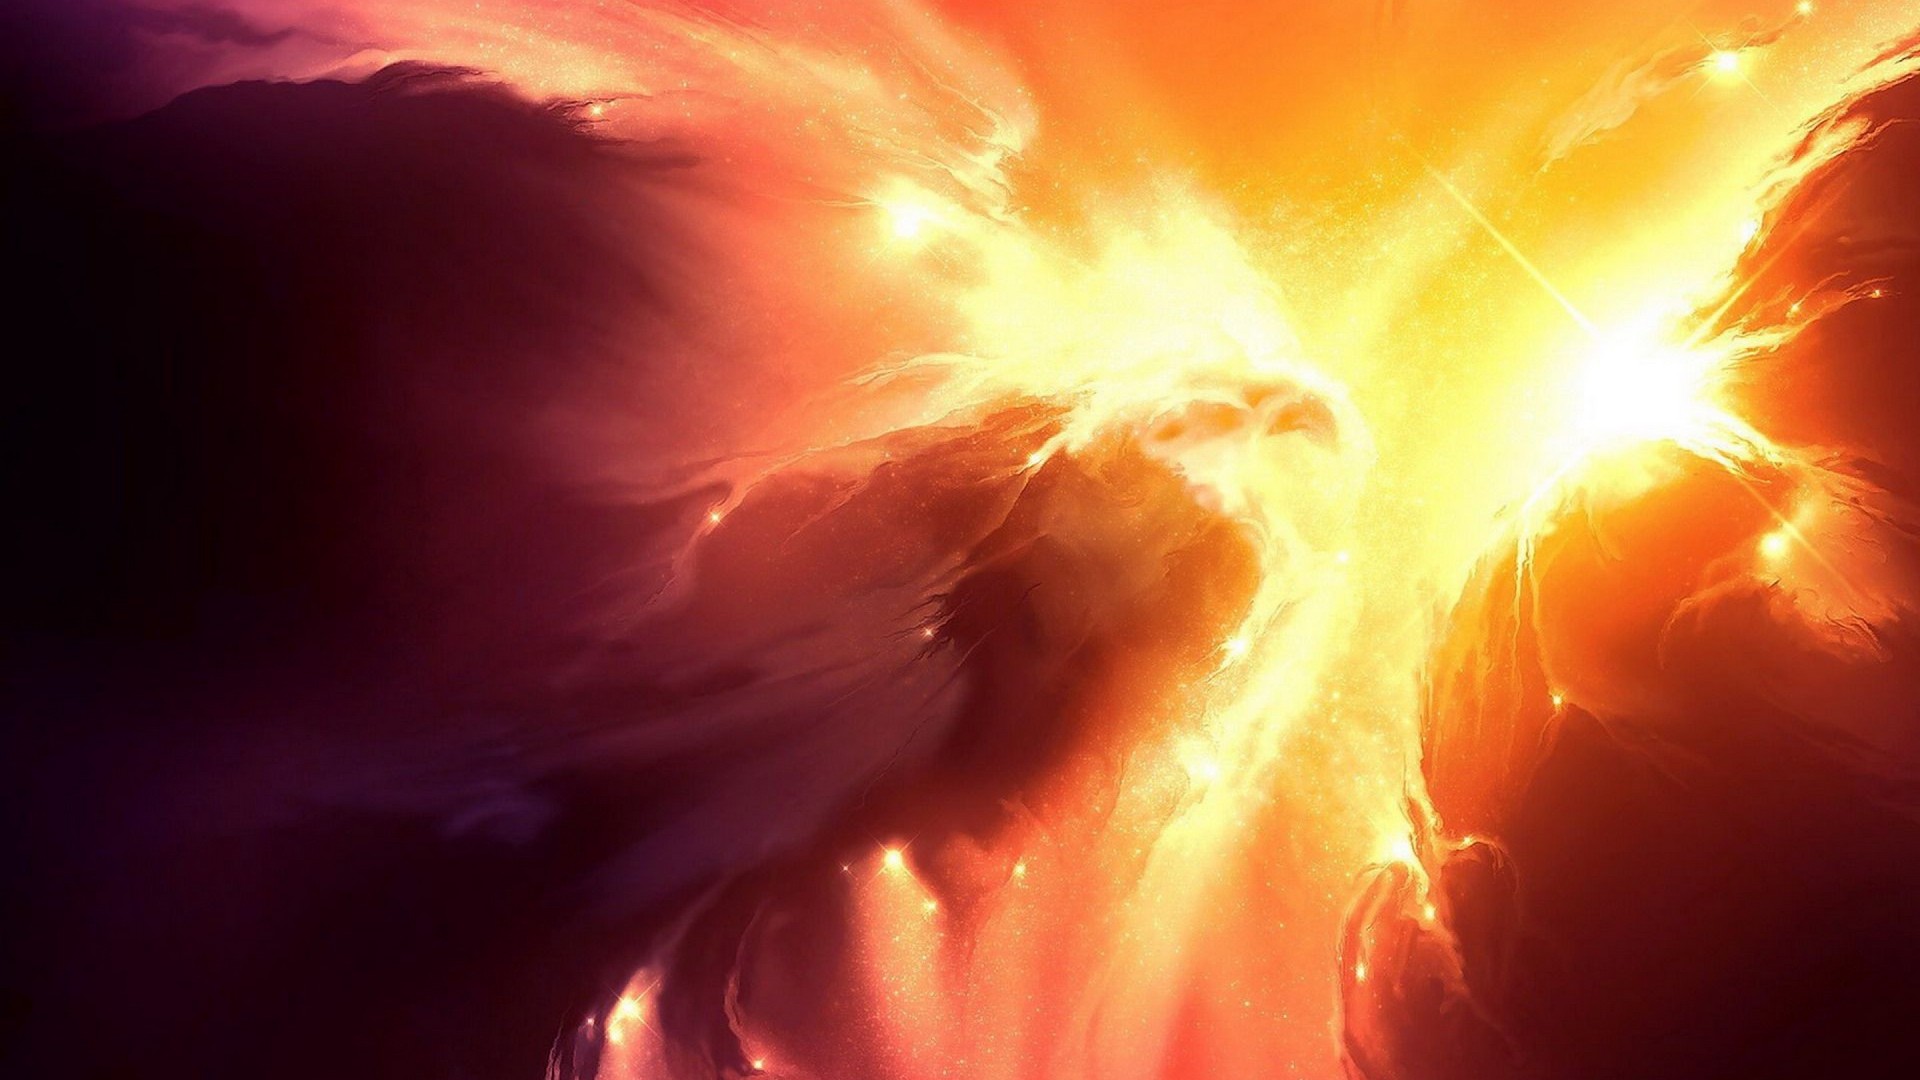 HD Wallpaper Phoenix With Resolution 1920X1080 pixel. You can make this wallpaper for your Desktop Computer Backgrounds, Mac Wallpapers, Android Lock screen or iPhone Screensavers